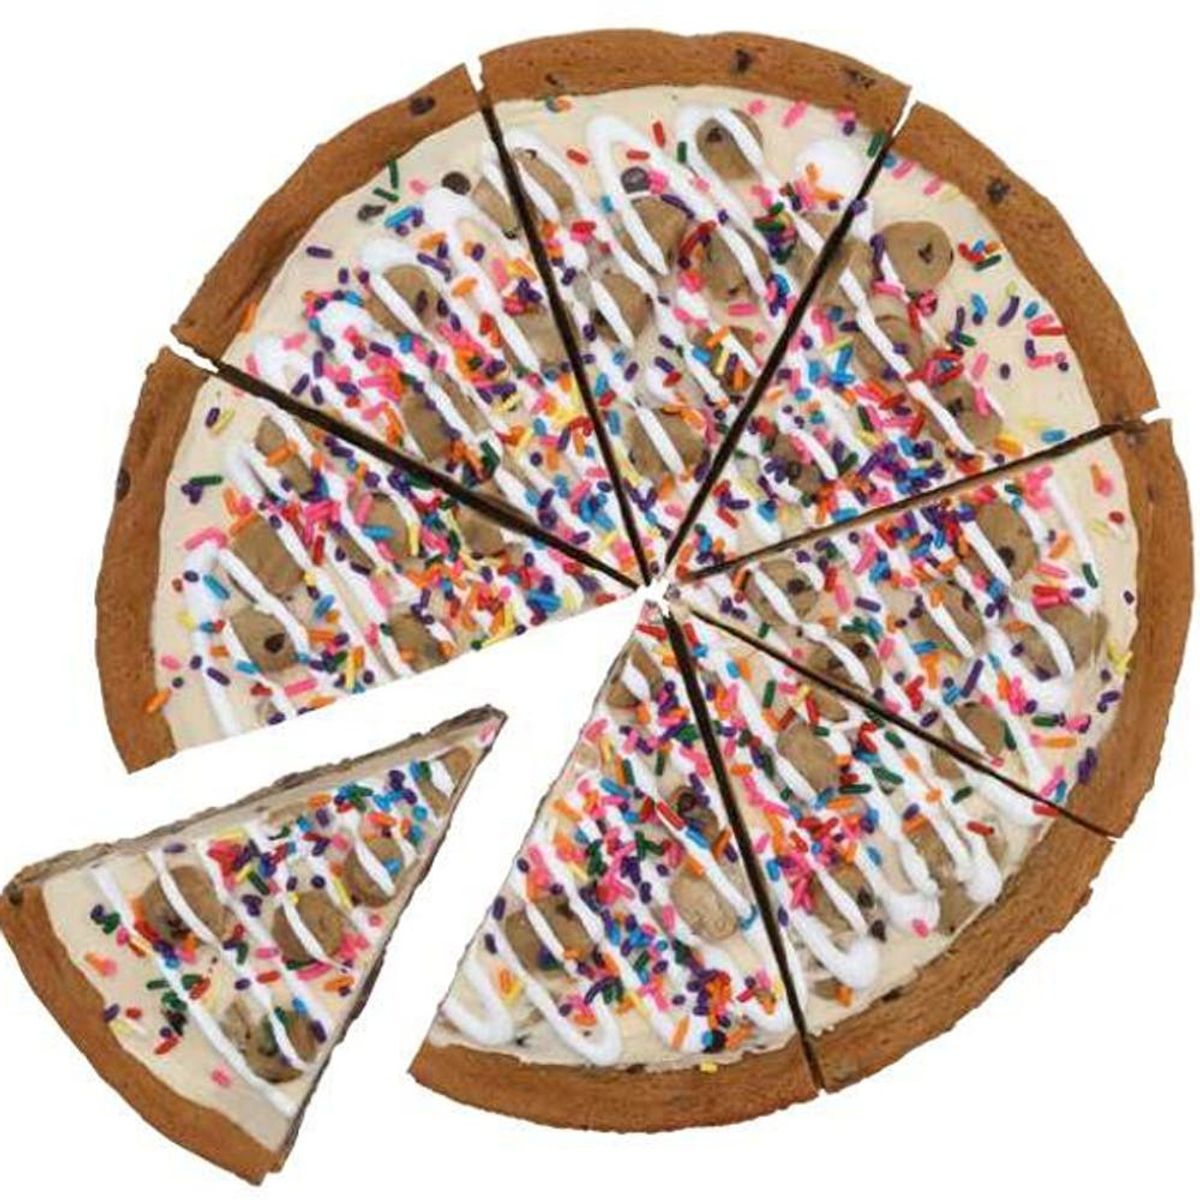 Baskin-Robbins Ice Cream Pizzas are Coming Back Just in Time For Summer